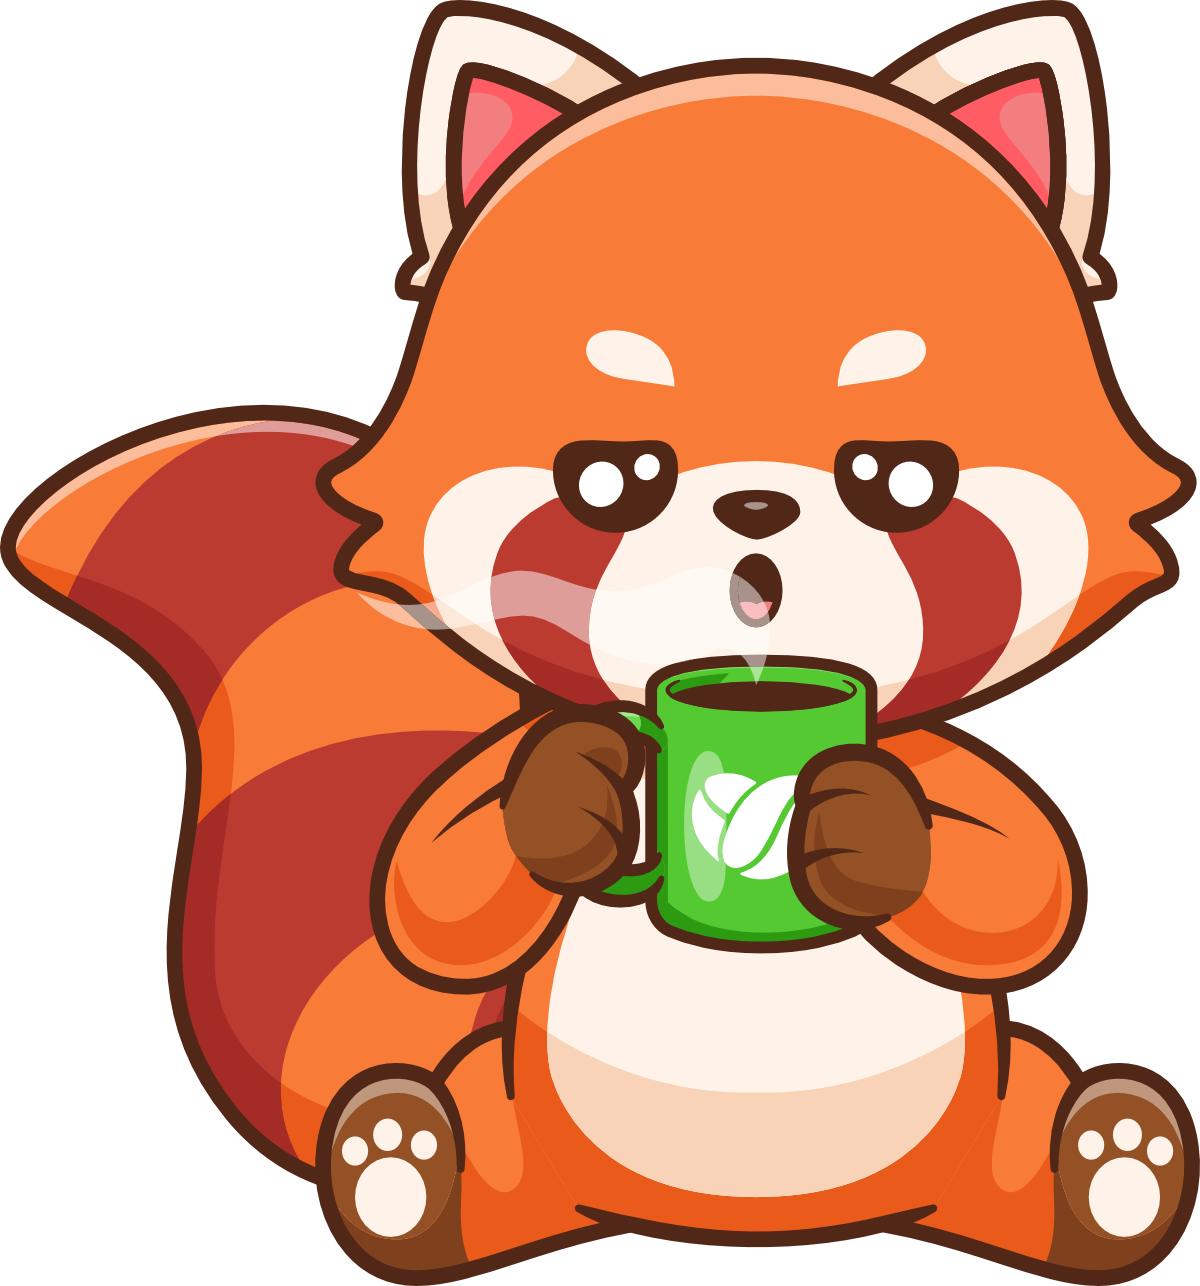 Red-panda-1 from animals - 38GRAPHICS